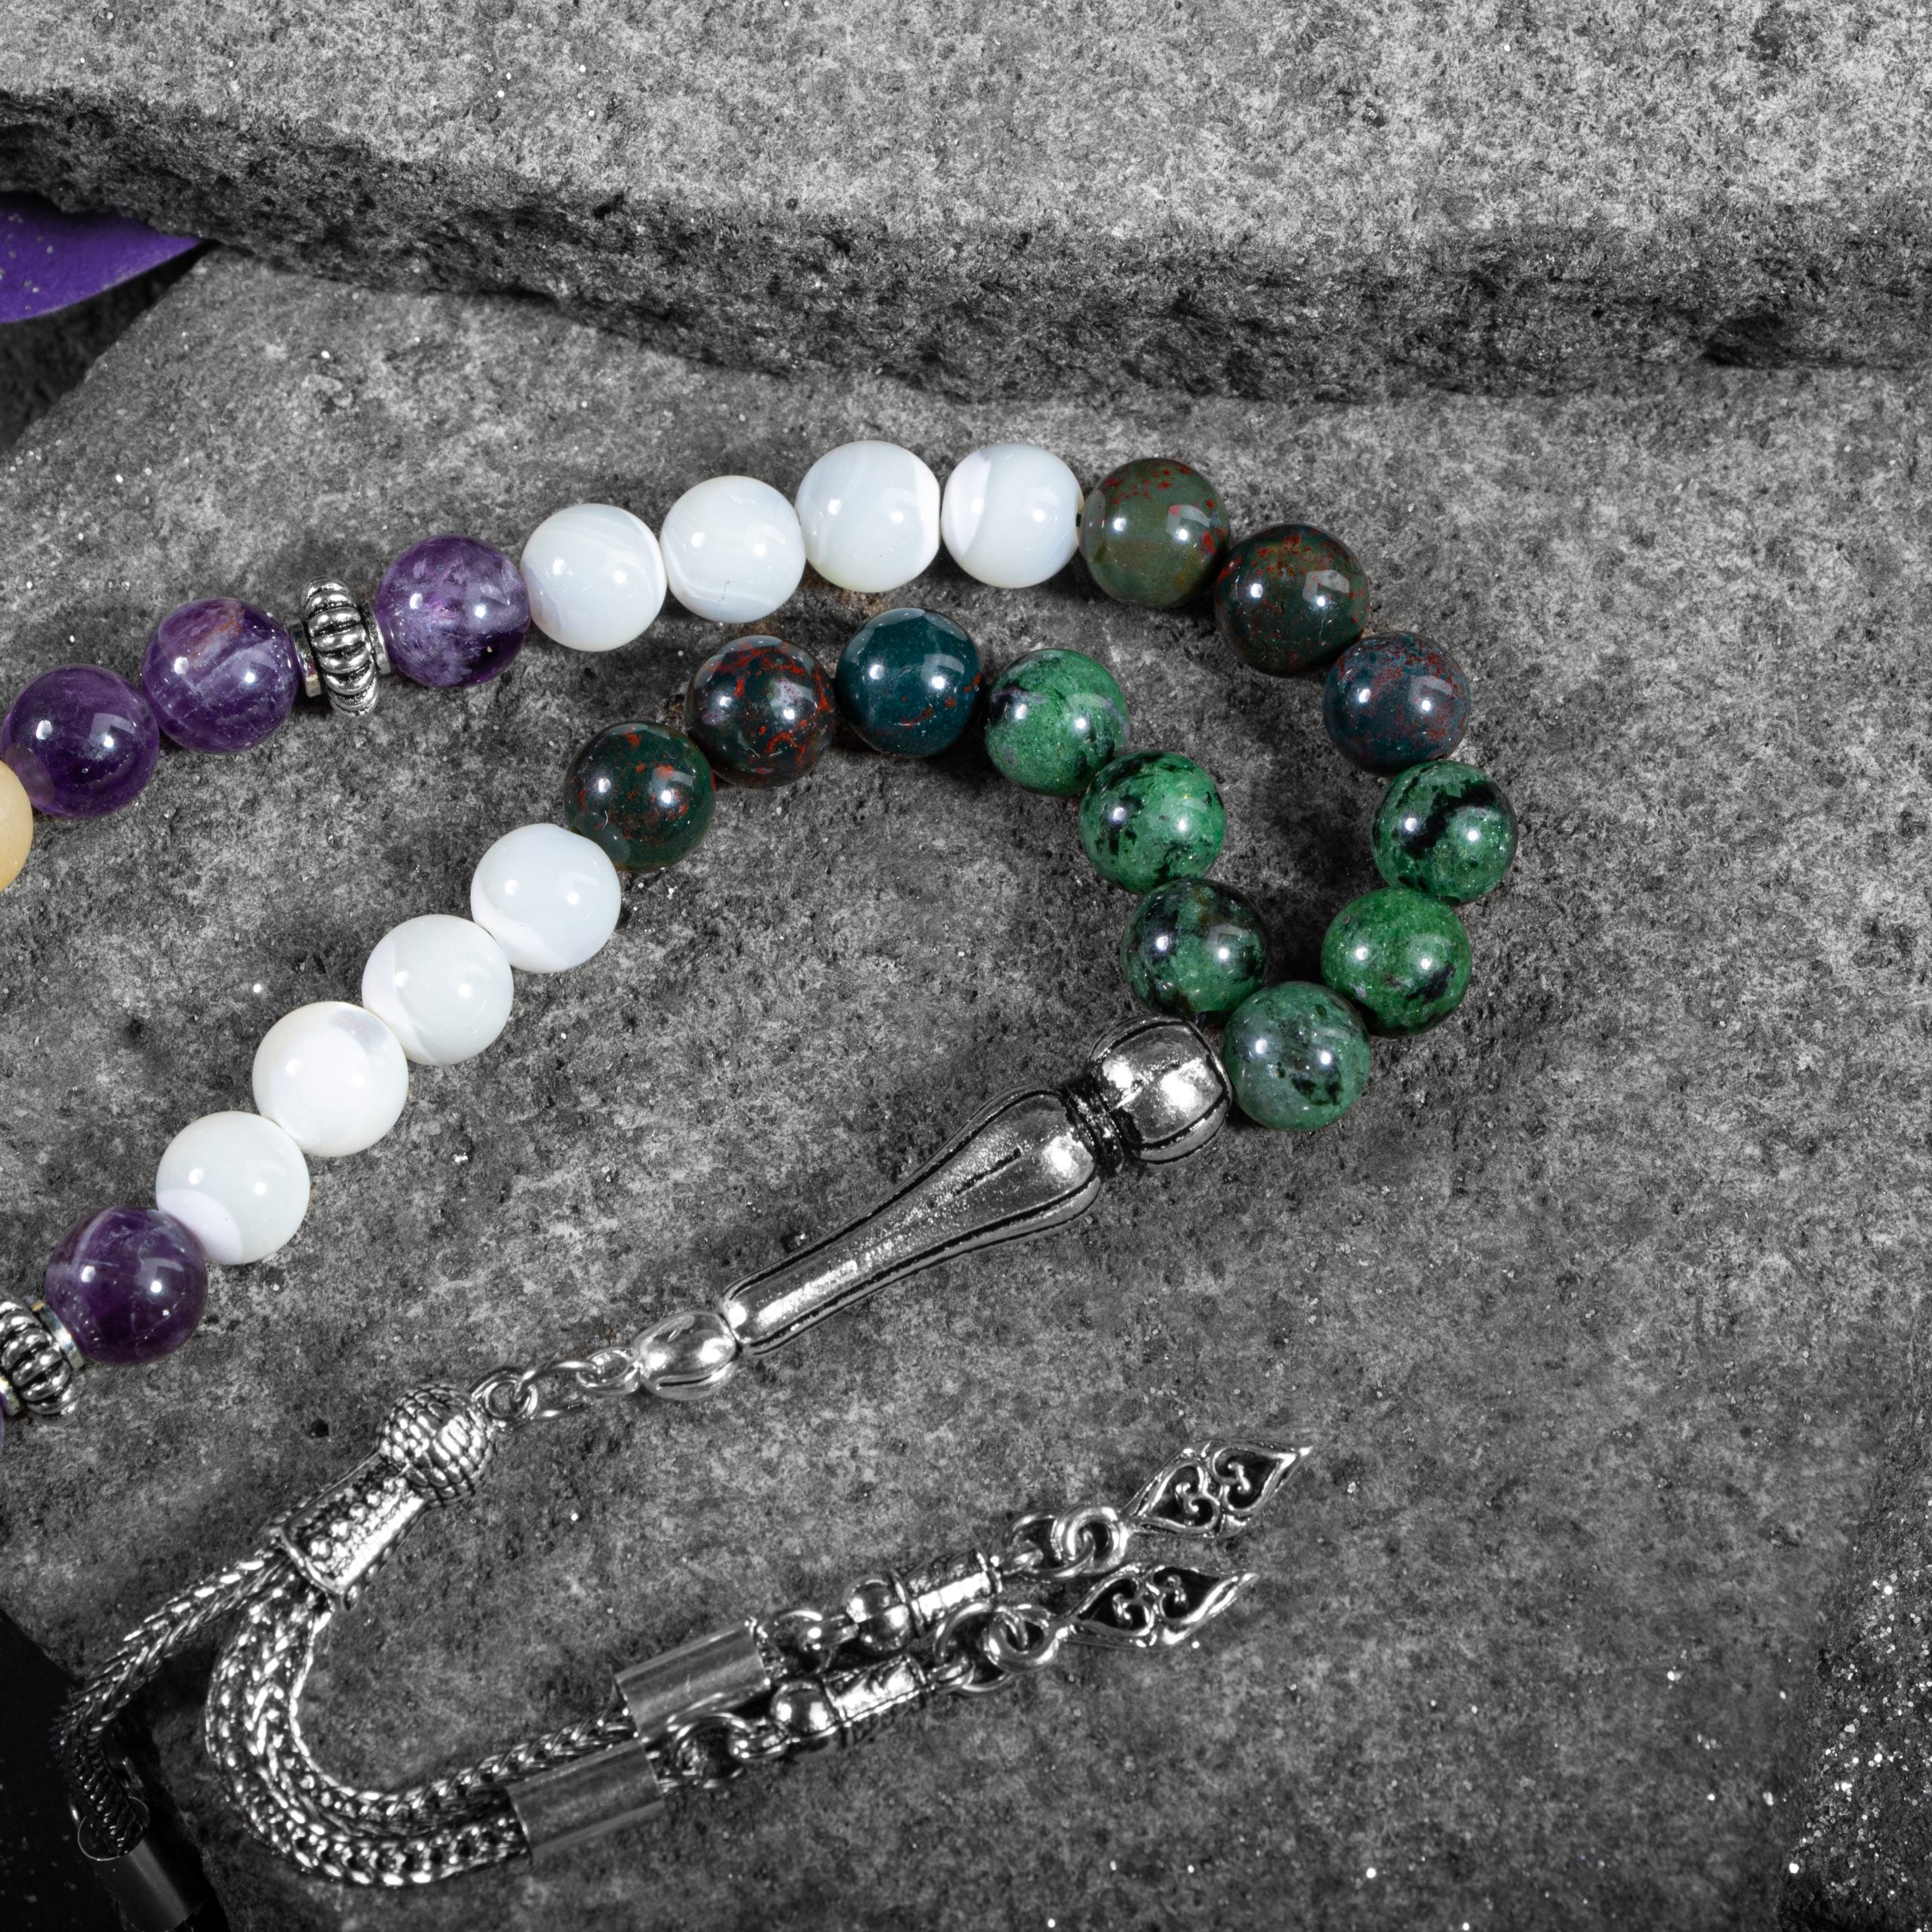 Cancer Rosary - Amethyst, Anyolite, Aragonite, Blood Stone, Mother of Pearl